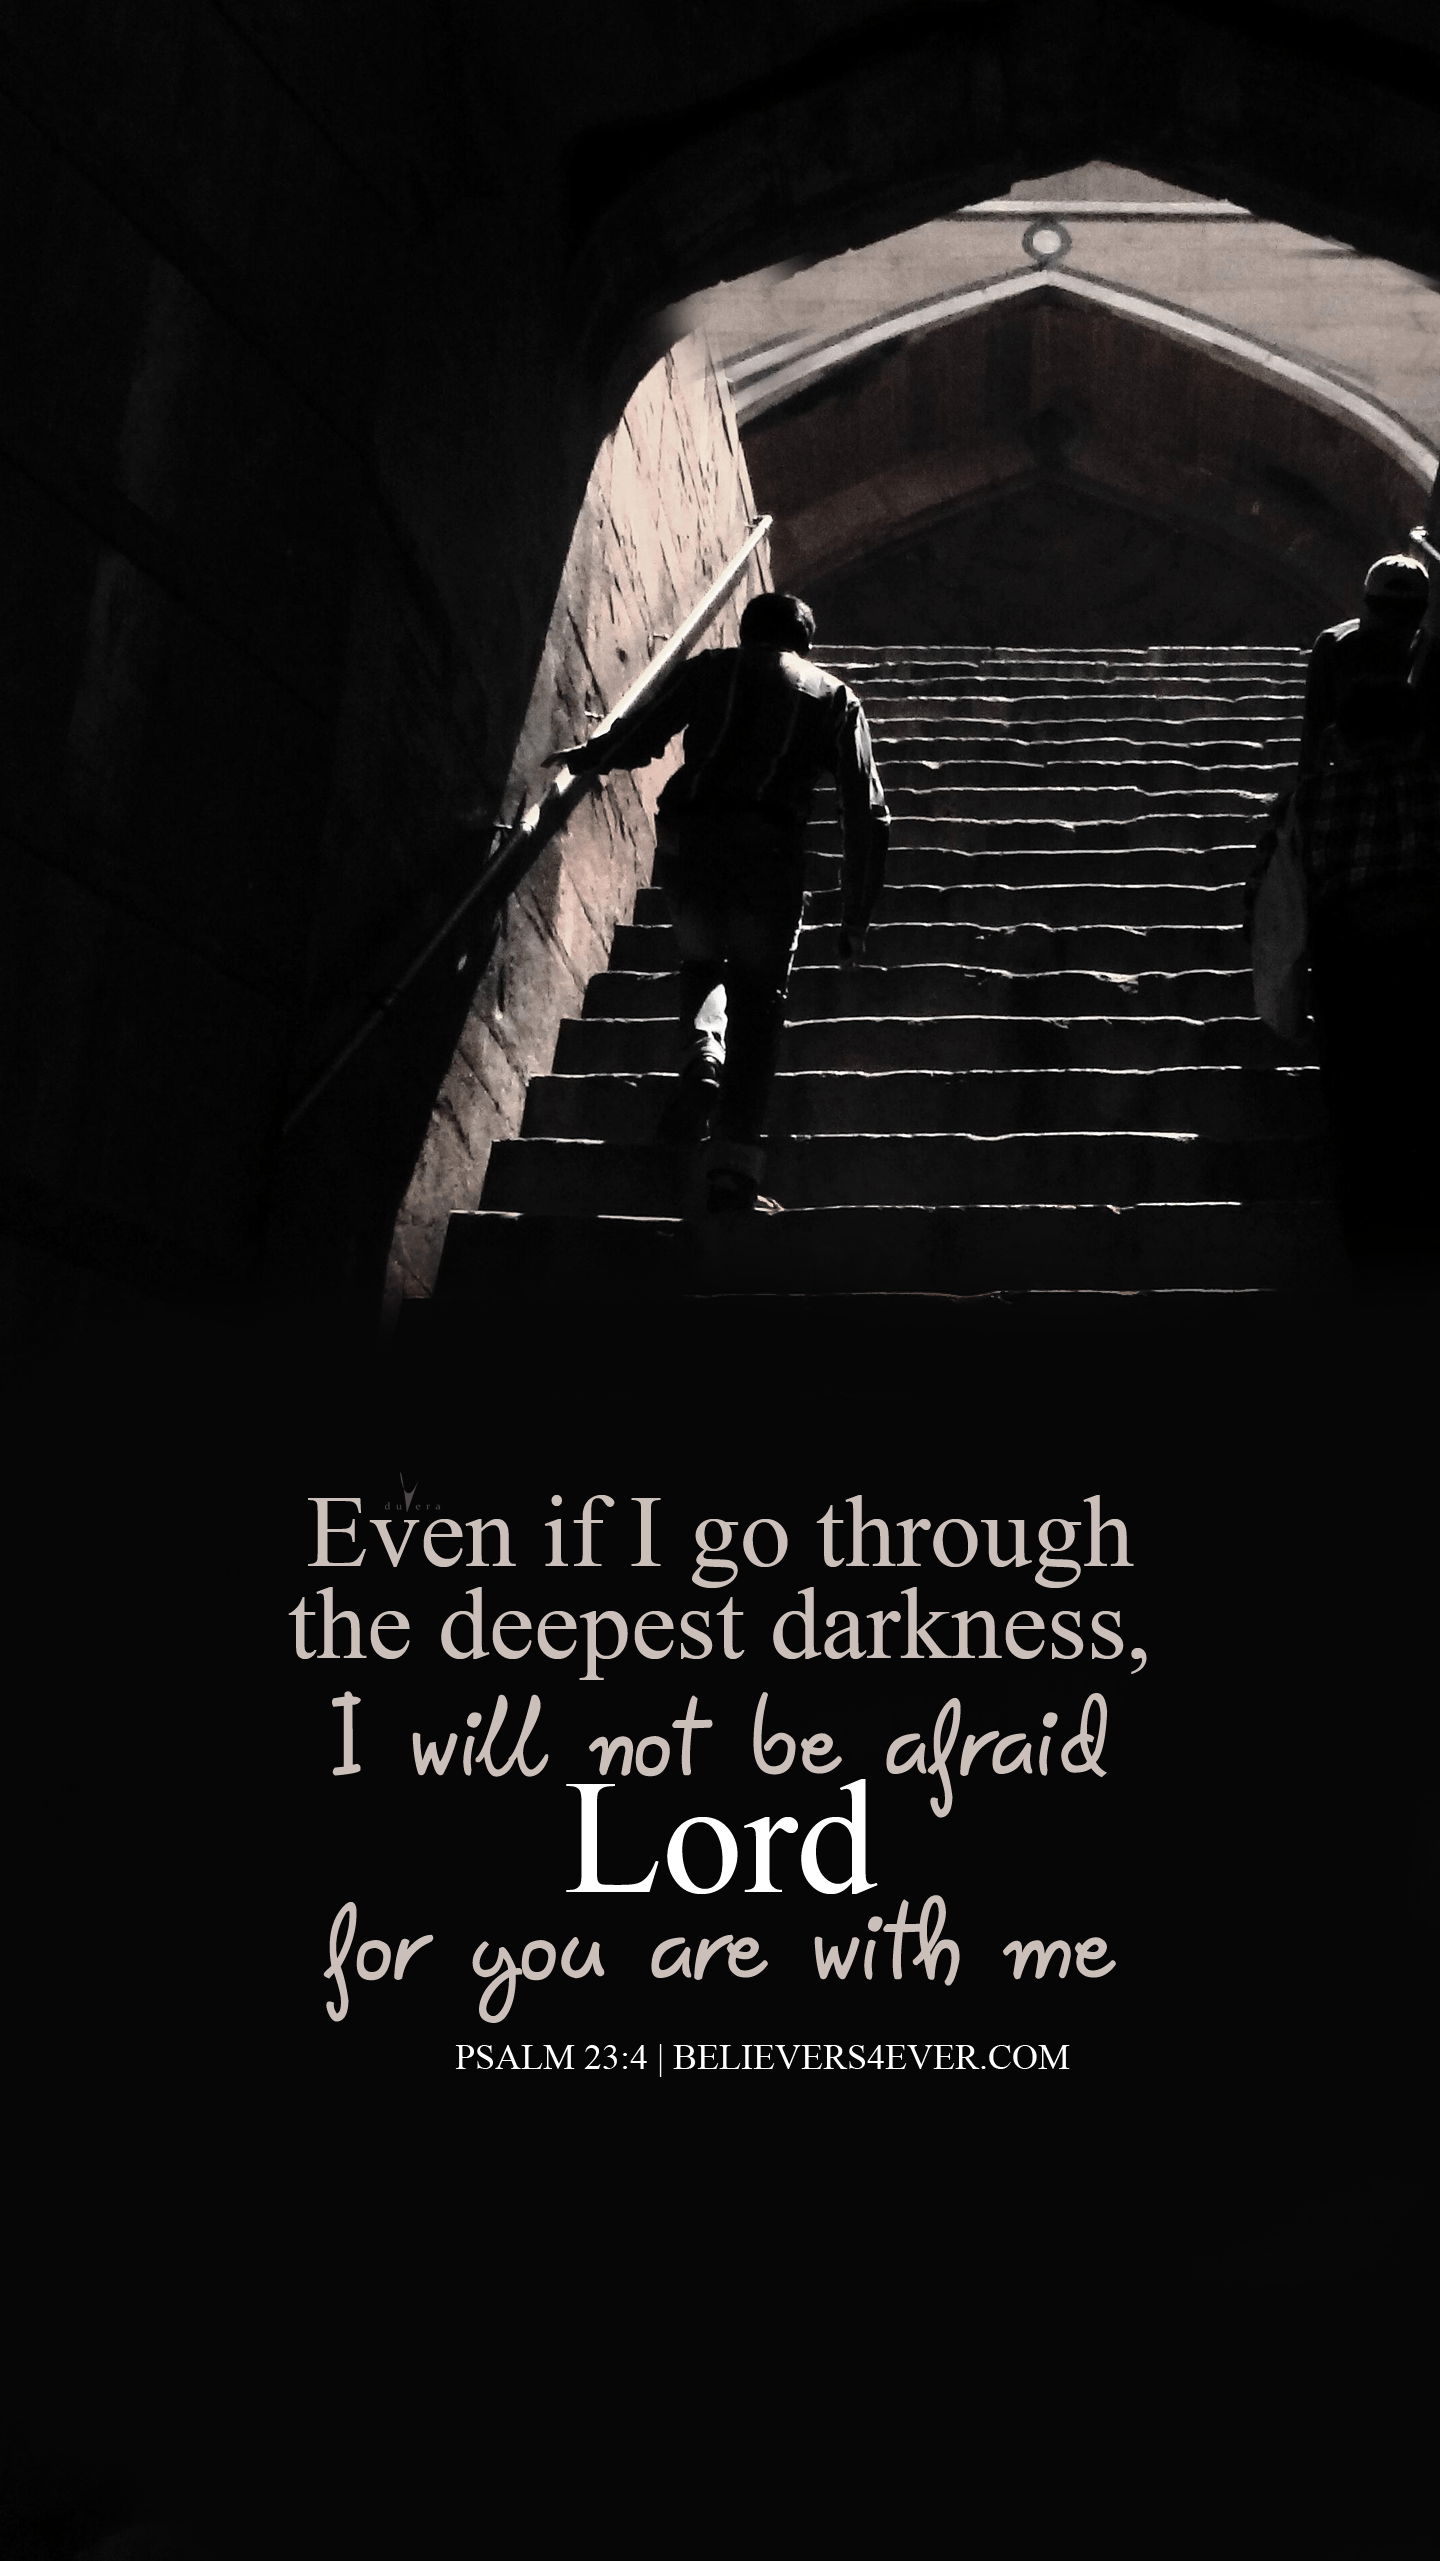 The deepest darkness. Bible psalms, Phone wallpaper quotes